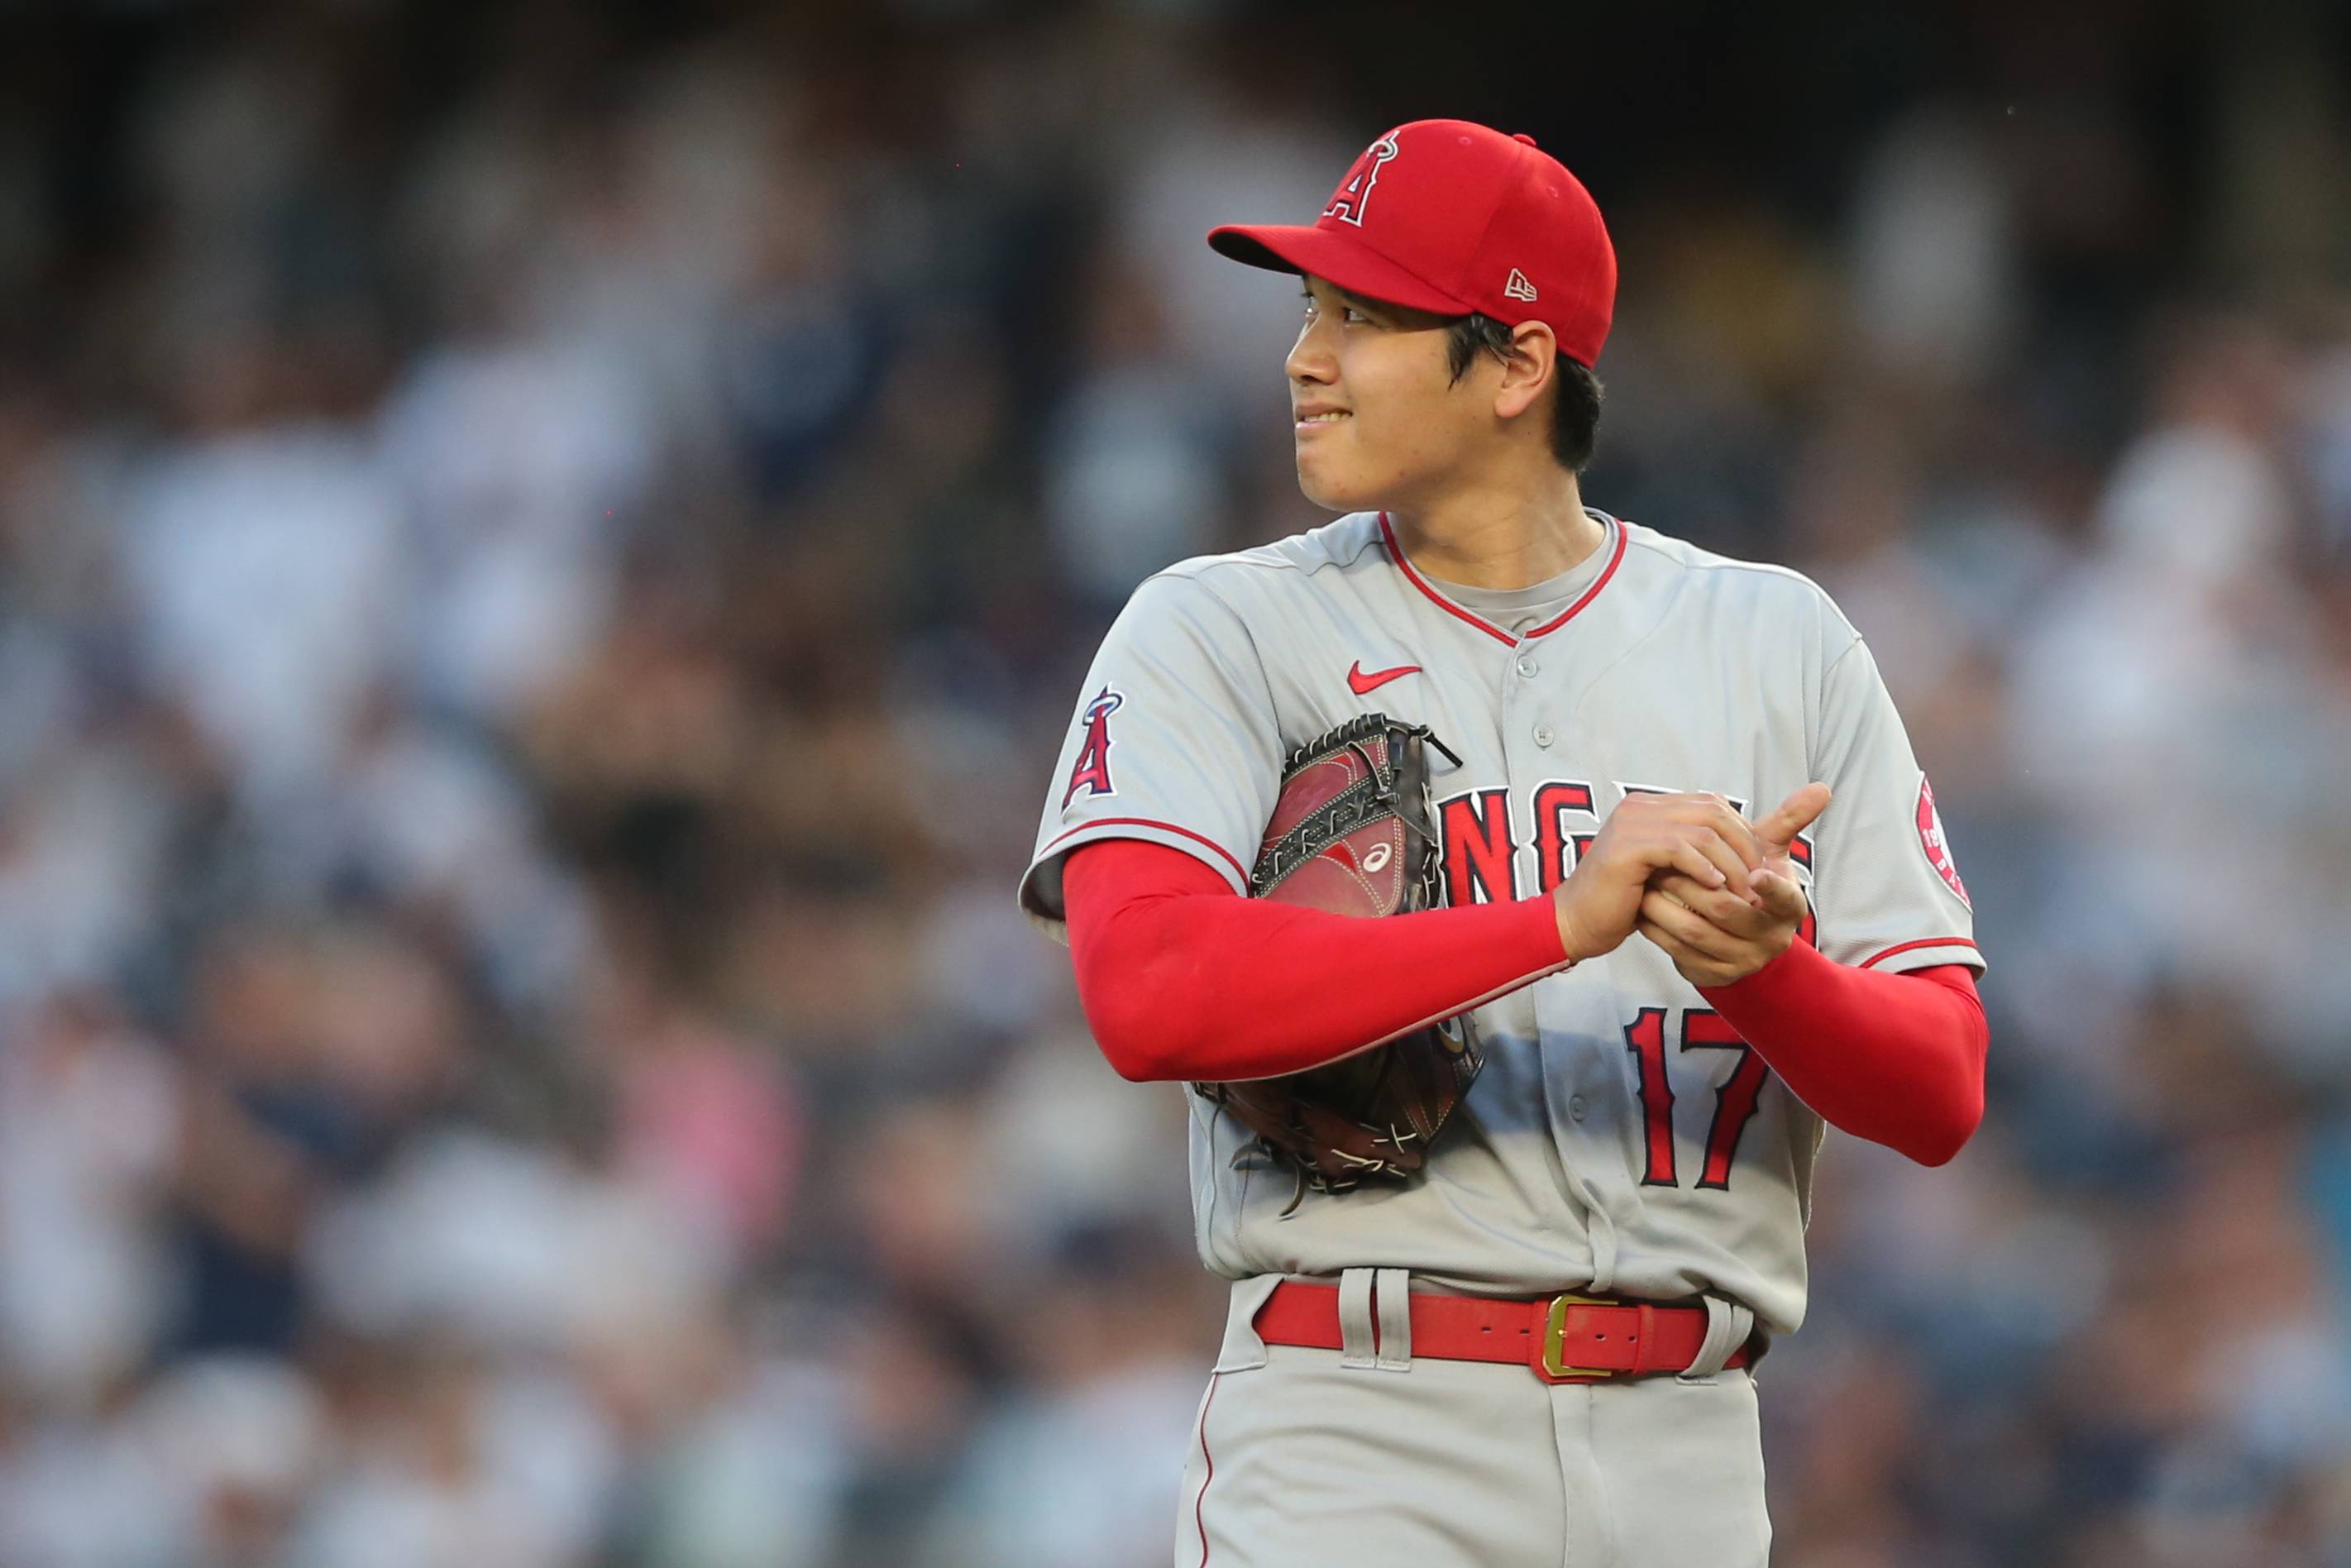 Shohei Ohtani pulled in first inning at Yankee Stadium; Angels rally to win  in ninth - The Japan Times